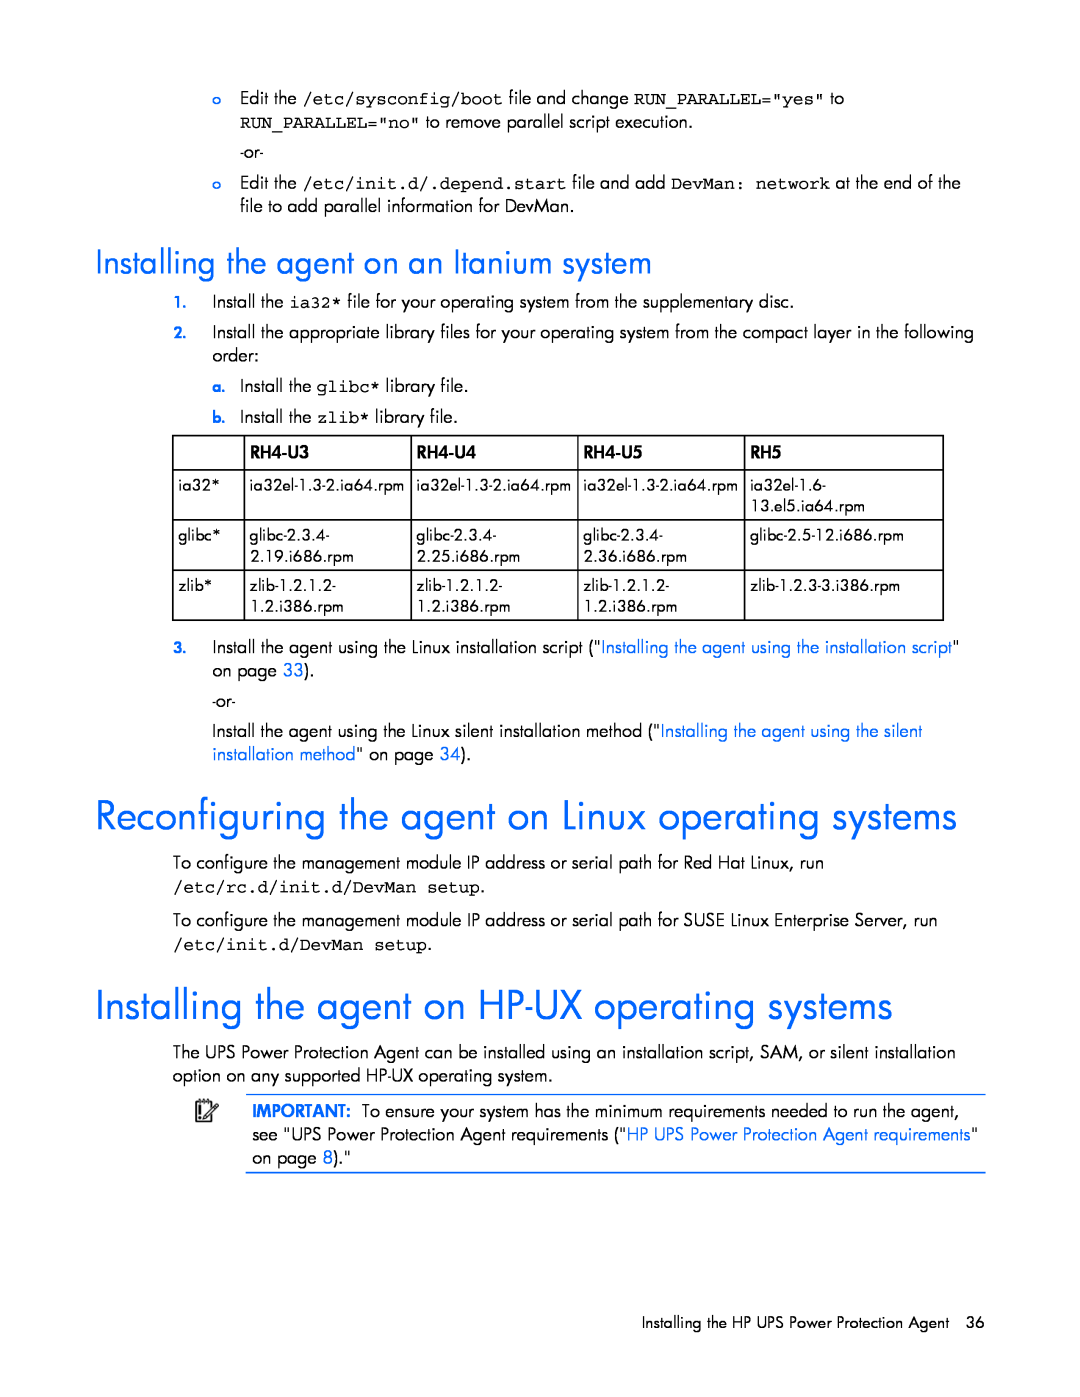 HP A1354A, A6584A manual Reconfiguring the agent on Linux operating systems, Installing the agent on HP-UX operating systems 